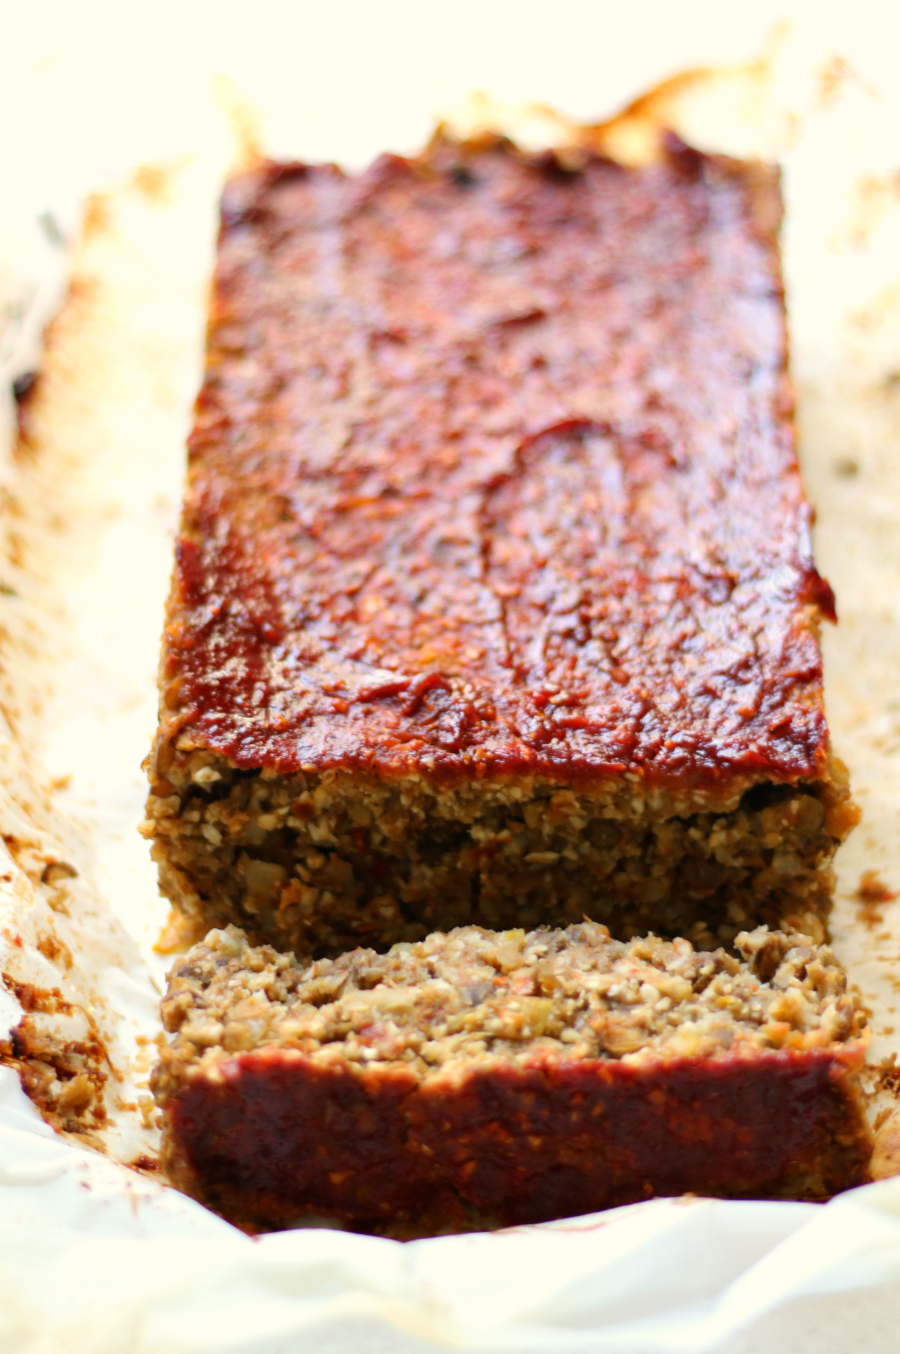 Vegan Cauliflower Lentil Loaf | Strength and Sunshine @RebeccaGF666 A hearty plant-based dinner idea that will satisfy even meat-eaters! A Vegan Cauliflower Lentil Loaf that mimics the classic meatloaf with no meat, gluten-free, nut-free, and soy-free! Get all your protein and veggies in this healthy recipe!